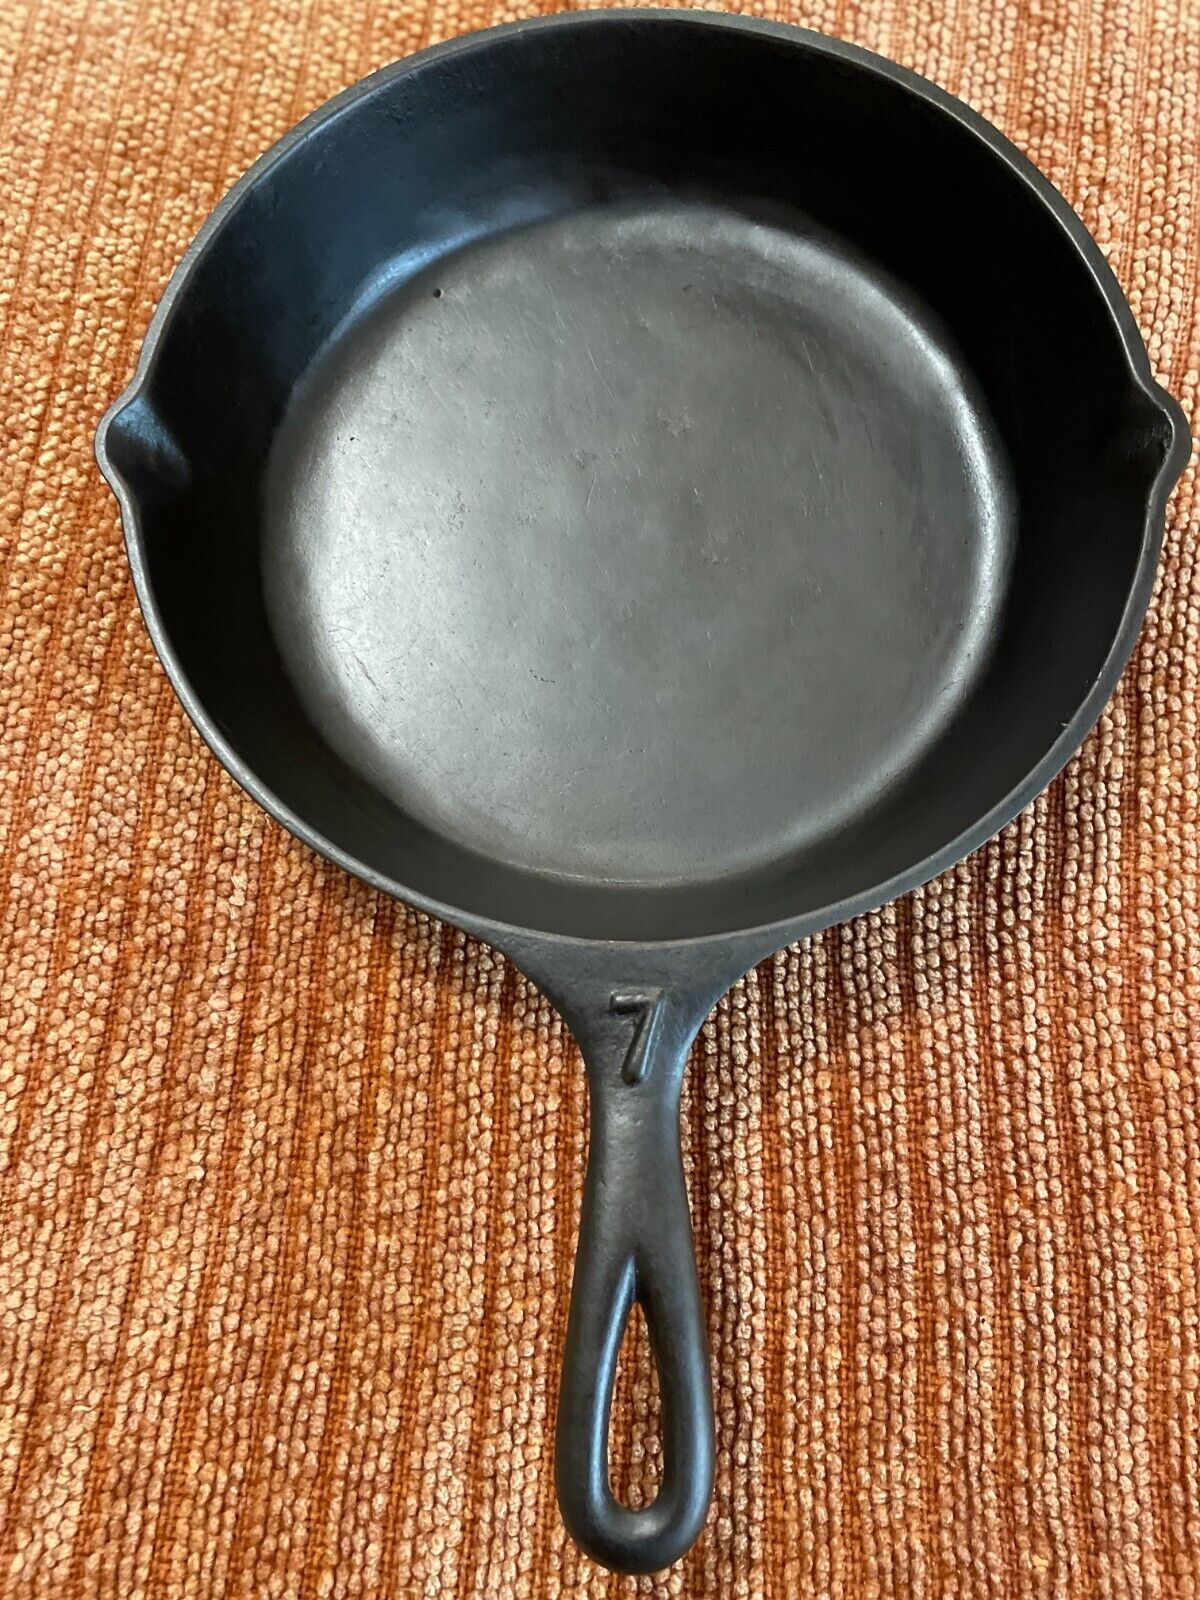 Southern Mystery Skillet SMS Raised #7 Vintage Cast Iron Restored